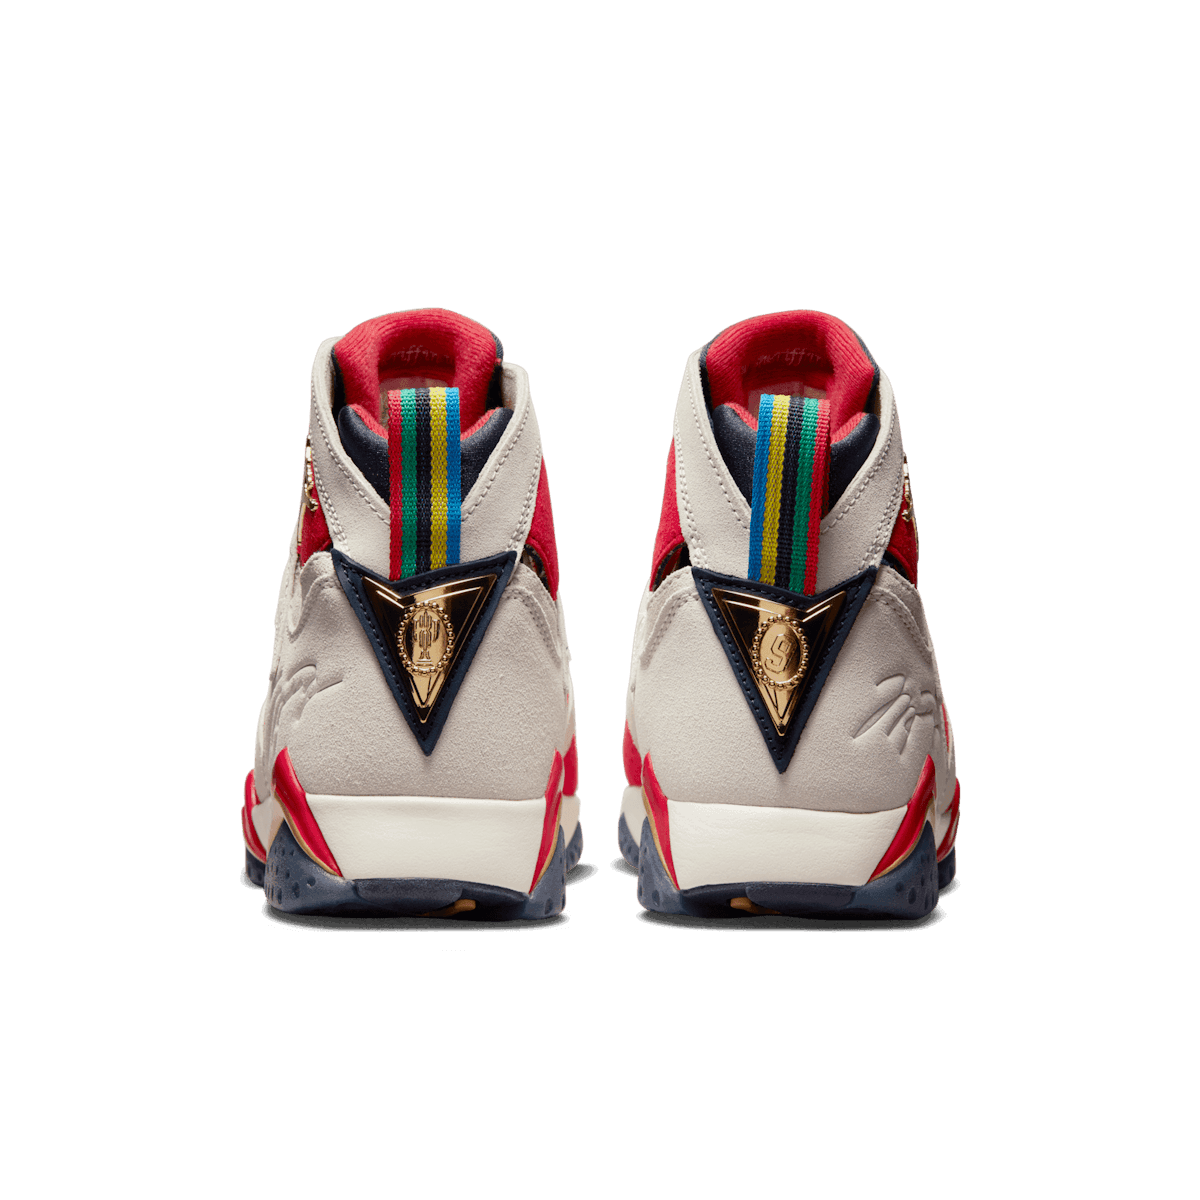 Jordan 7 Trophy Room New Sheriff in Town Angle 3